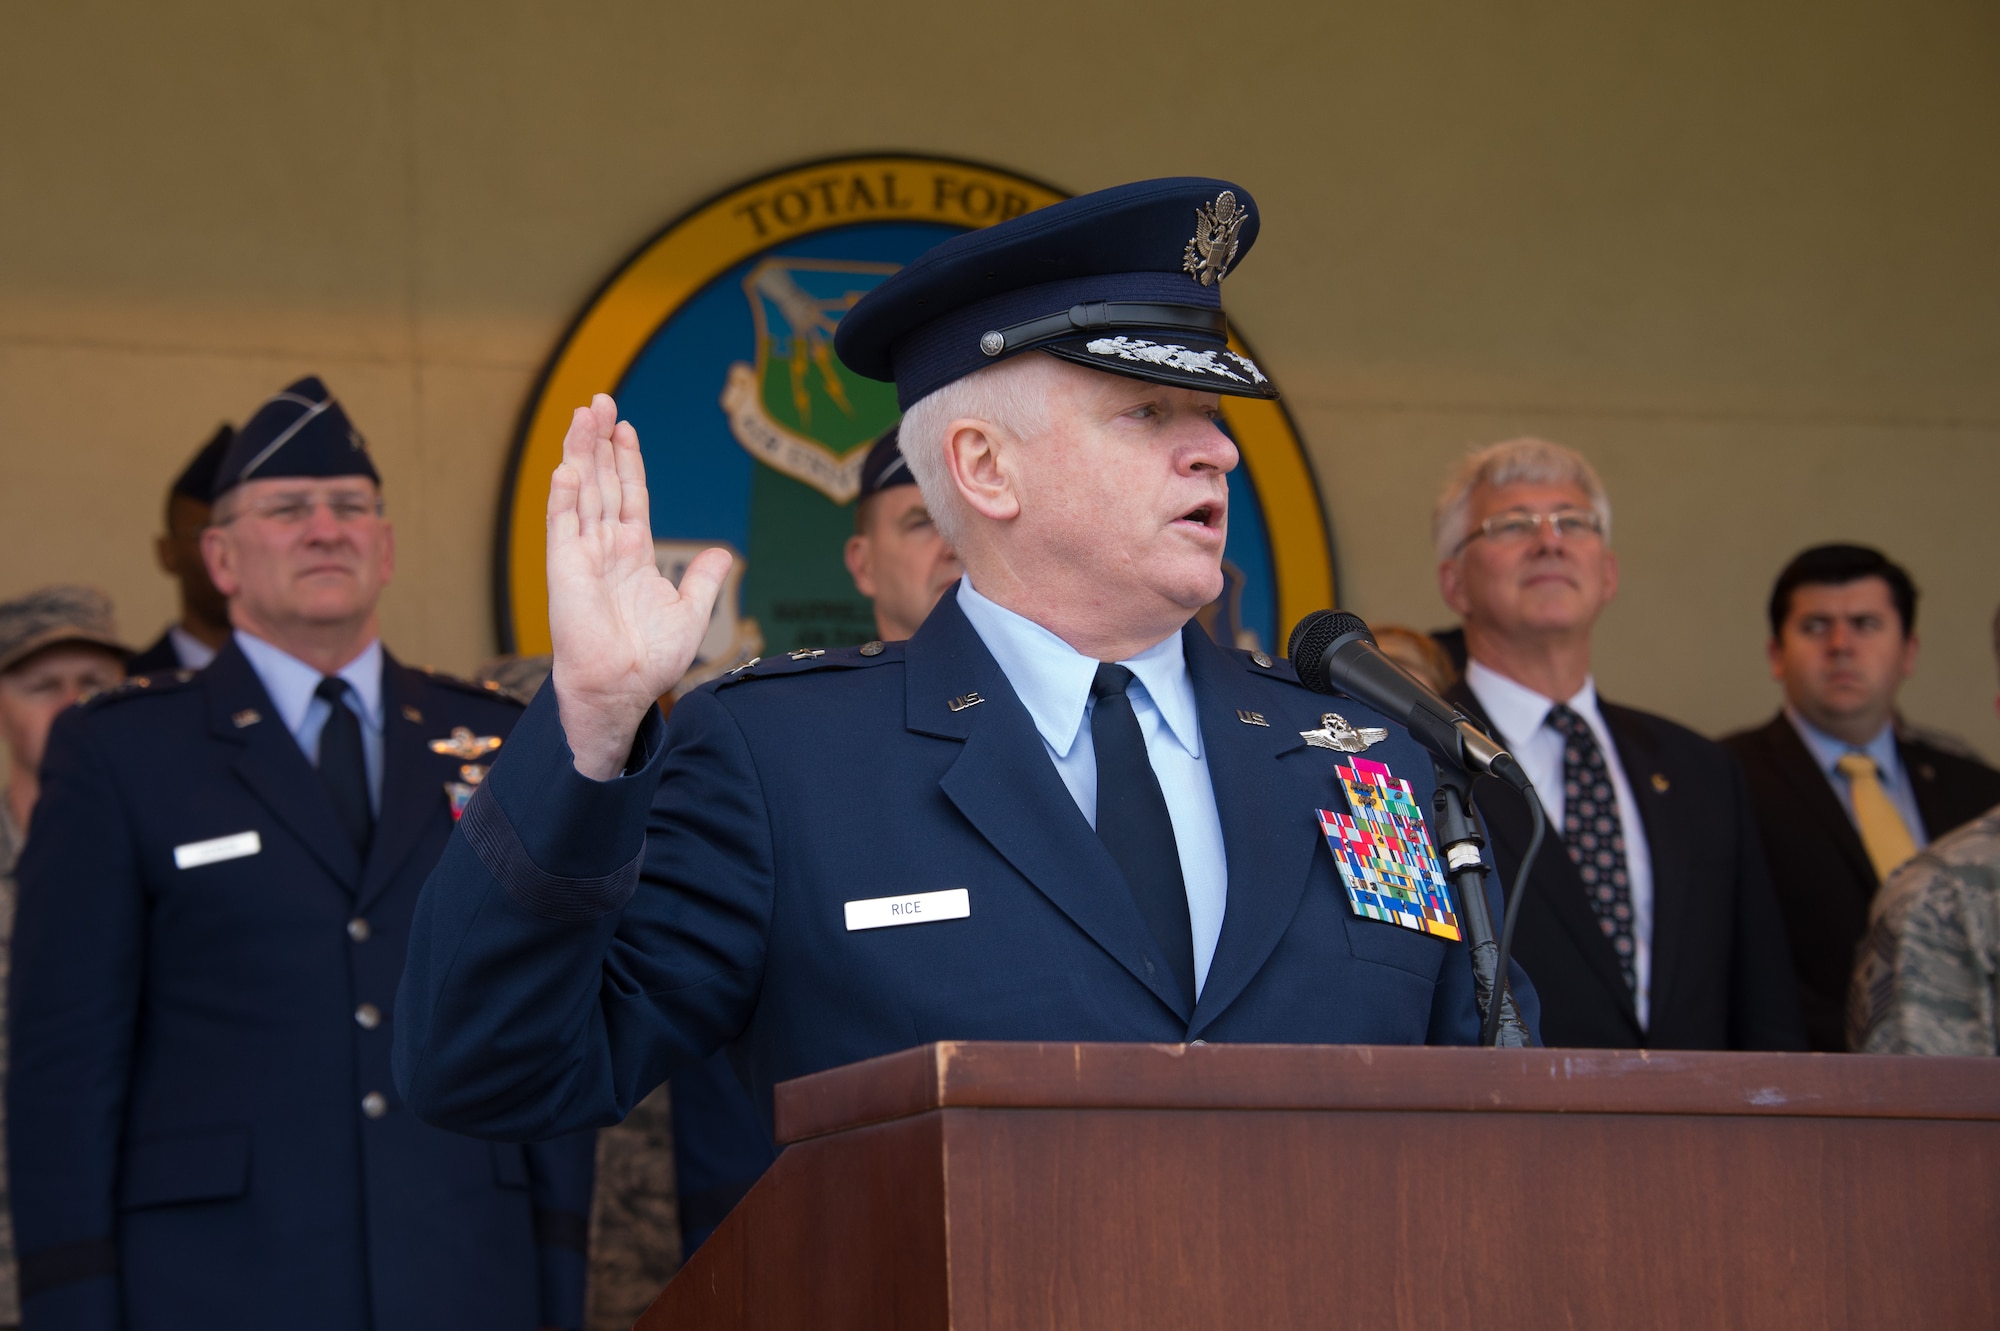 Major Gen. Scott Rice, adjutant general for the state of Massachusetts,
administers the oath of office to a class of graduating cadets at Air Force
Officer Training School, Maxwell Air Force Base, Alabama, March 13, 2015.
The class of 106 new officers is the first to graduate as a combined class,
with students representing the regular Air Force, Reserve and Guard.
Previously, Guard cadets commissioned through the Air National Guard's
Academy of Military Science here. Now, all cadets from the total force will
commission through OTS.  (U.S. Air Force photo by Melanie Cox) 
